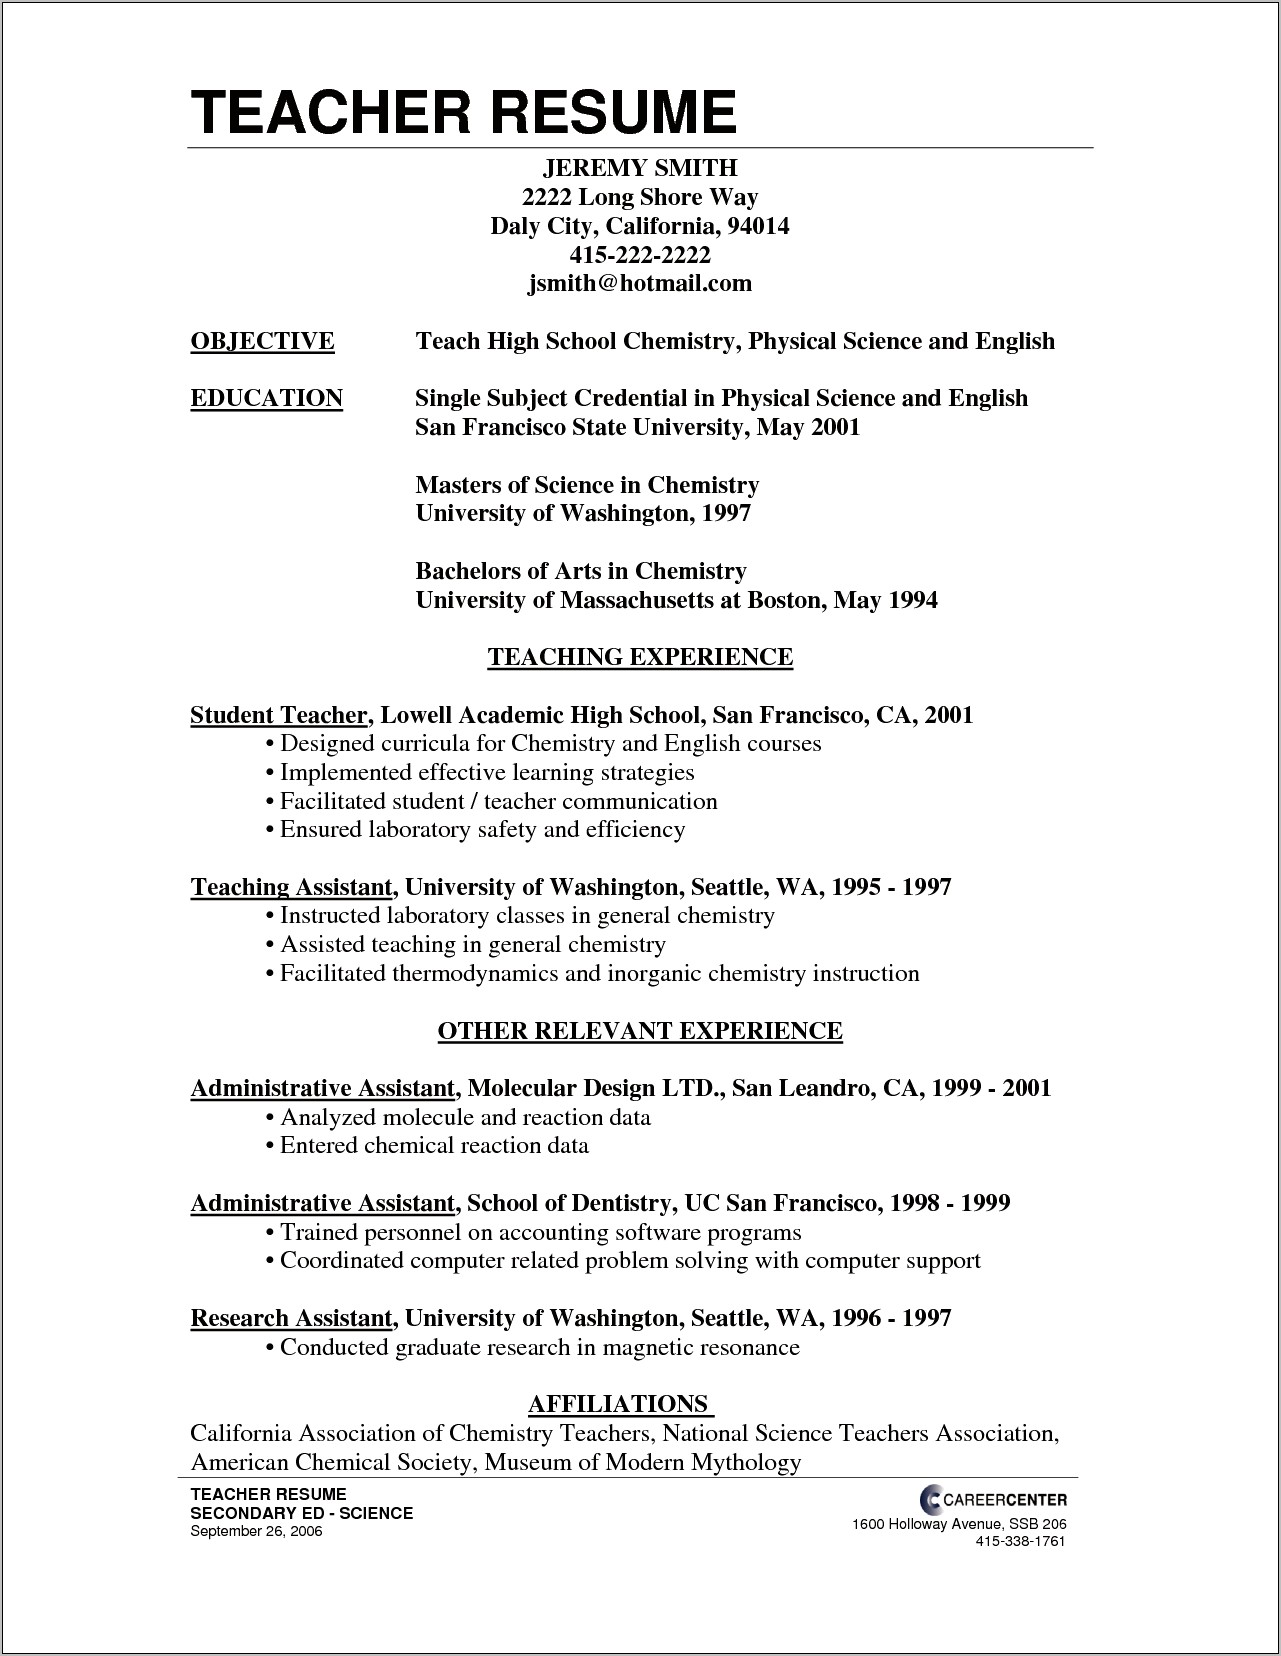 Sample Resume Objective Statement For Teaching